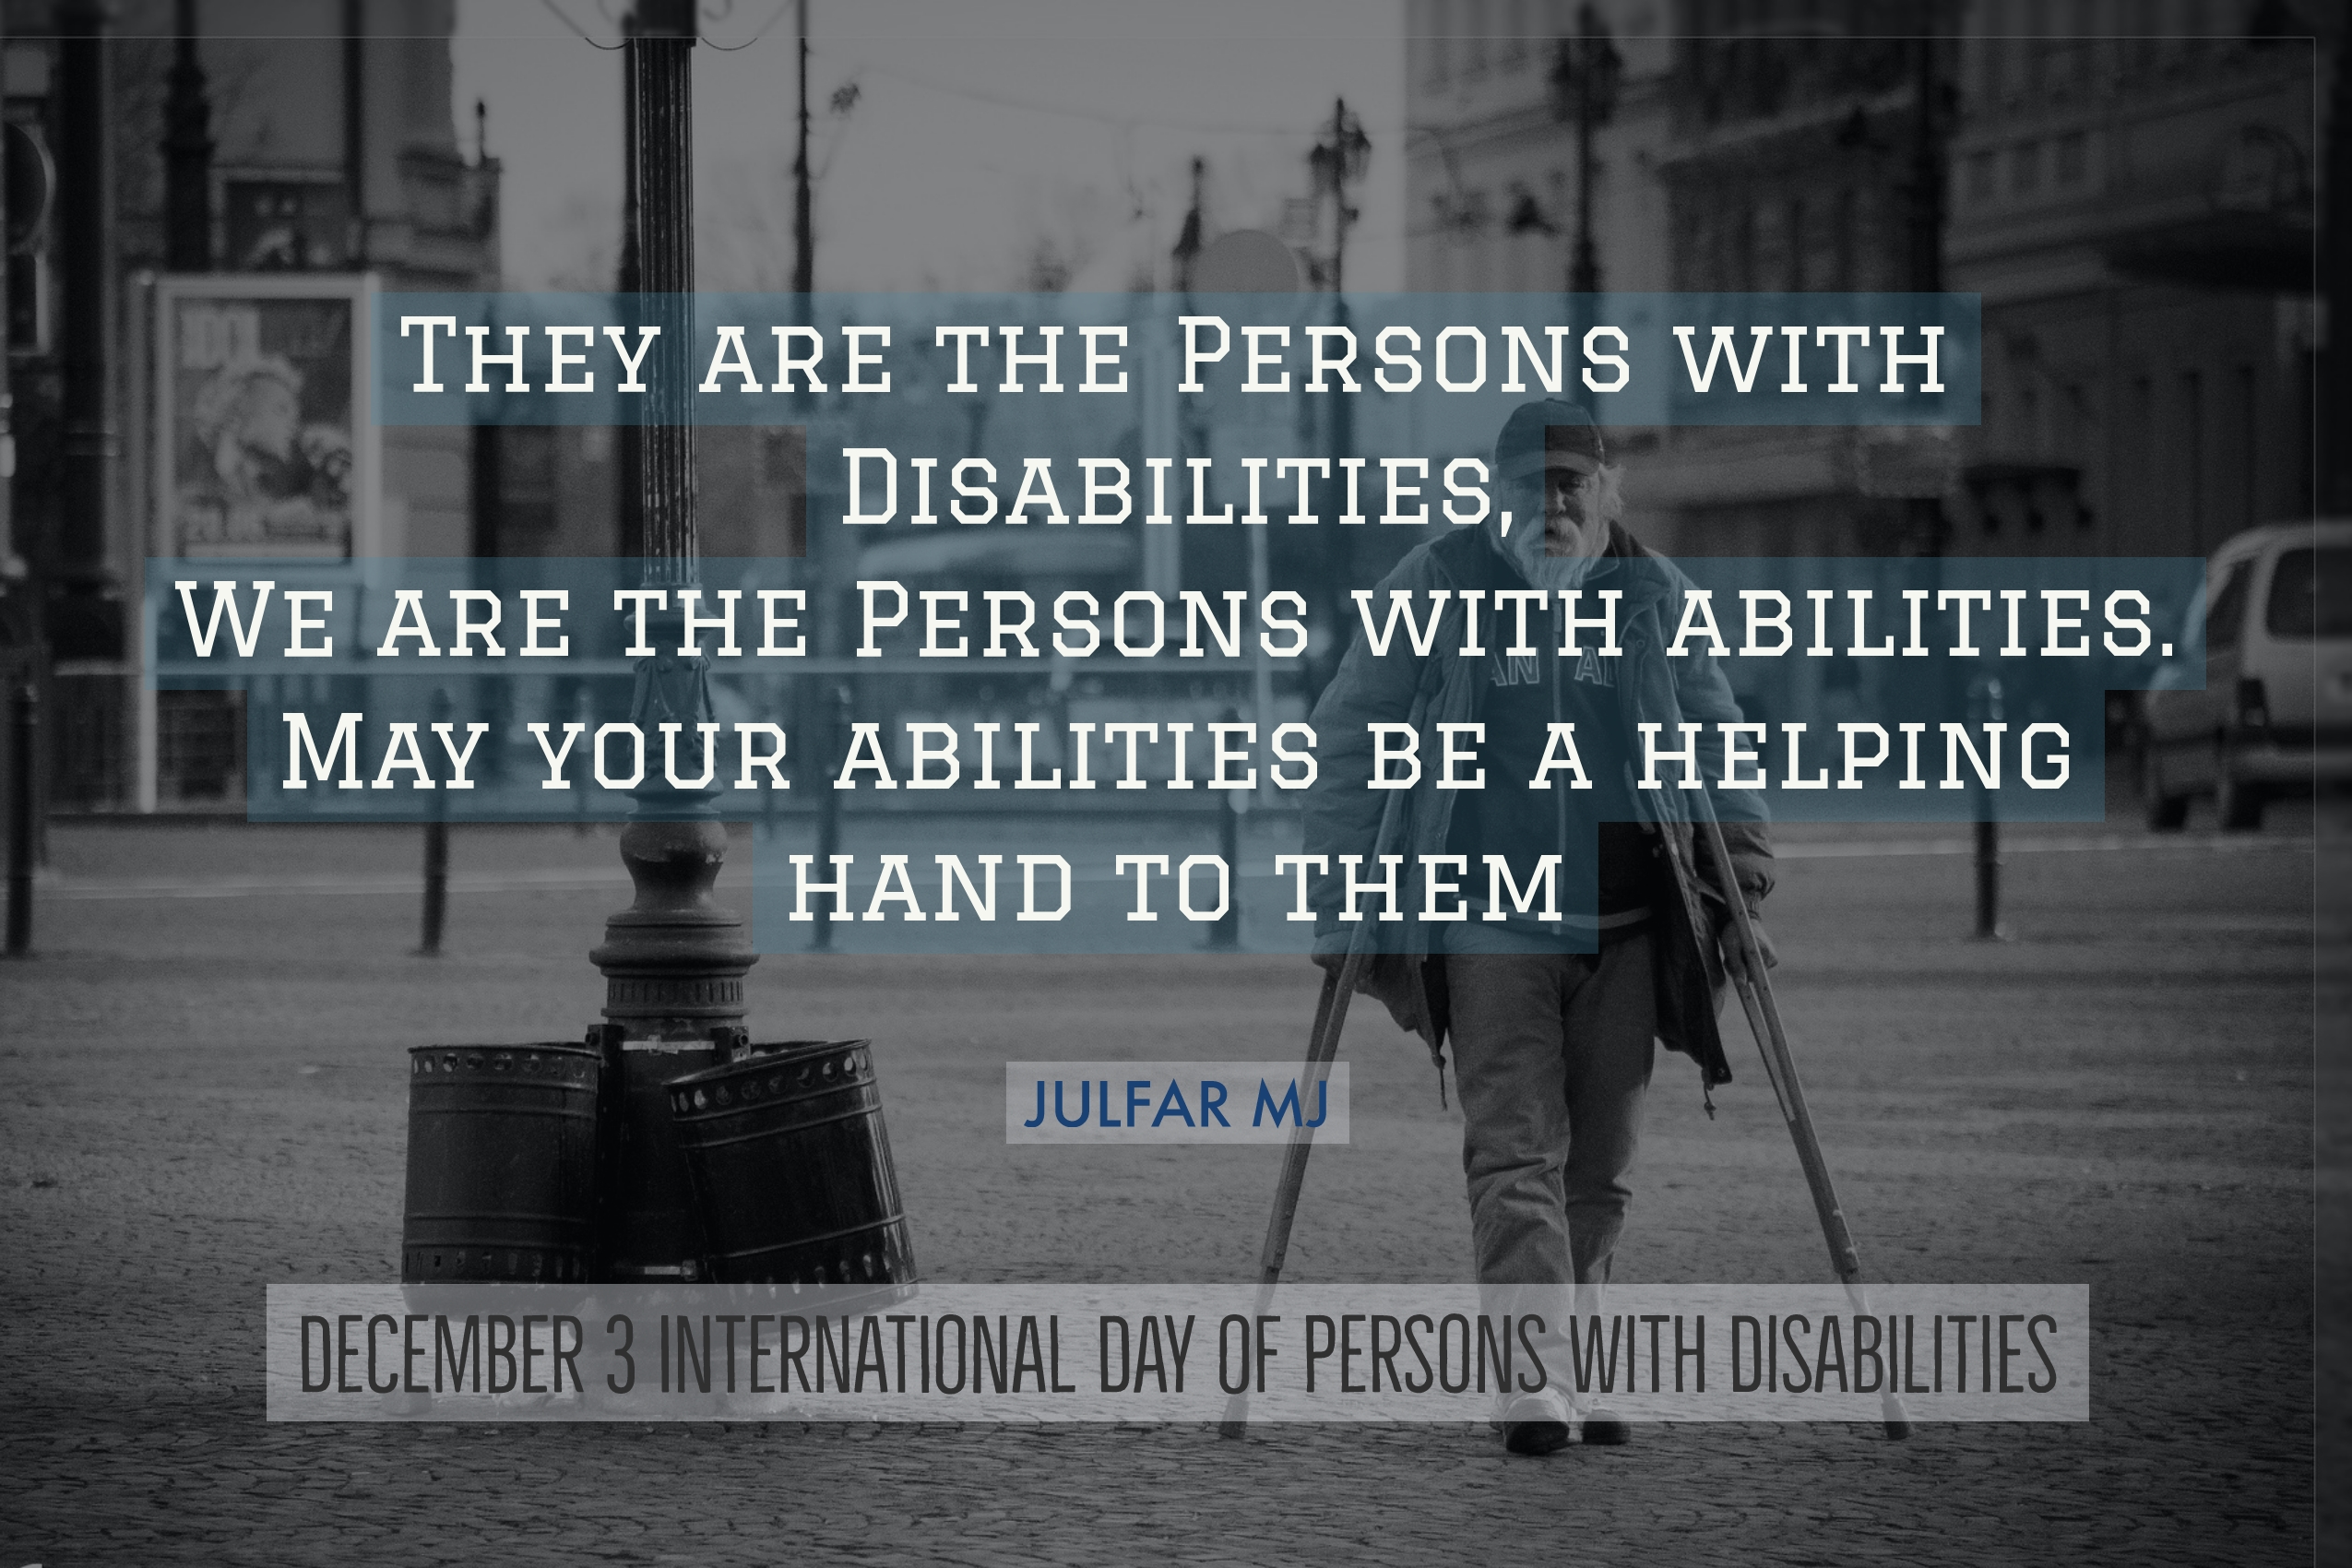 They are the Persons with Disabilities, We are the Persons with abilities. May your abilities be a helping hand to them.  - JULFAR MJ December 3 International Day of Persons with Disabilities